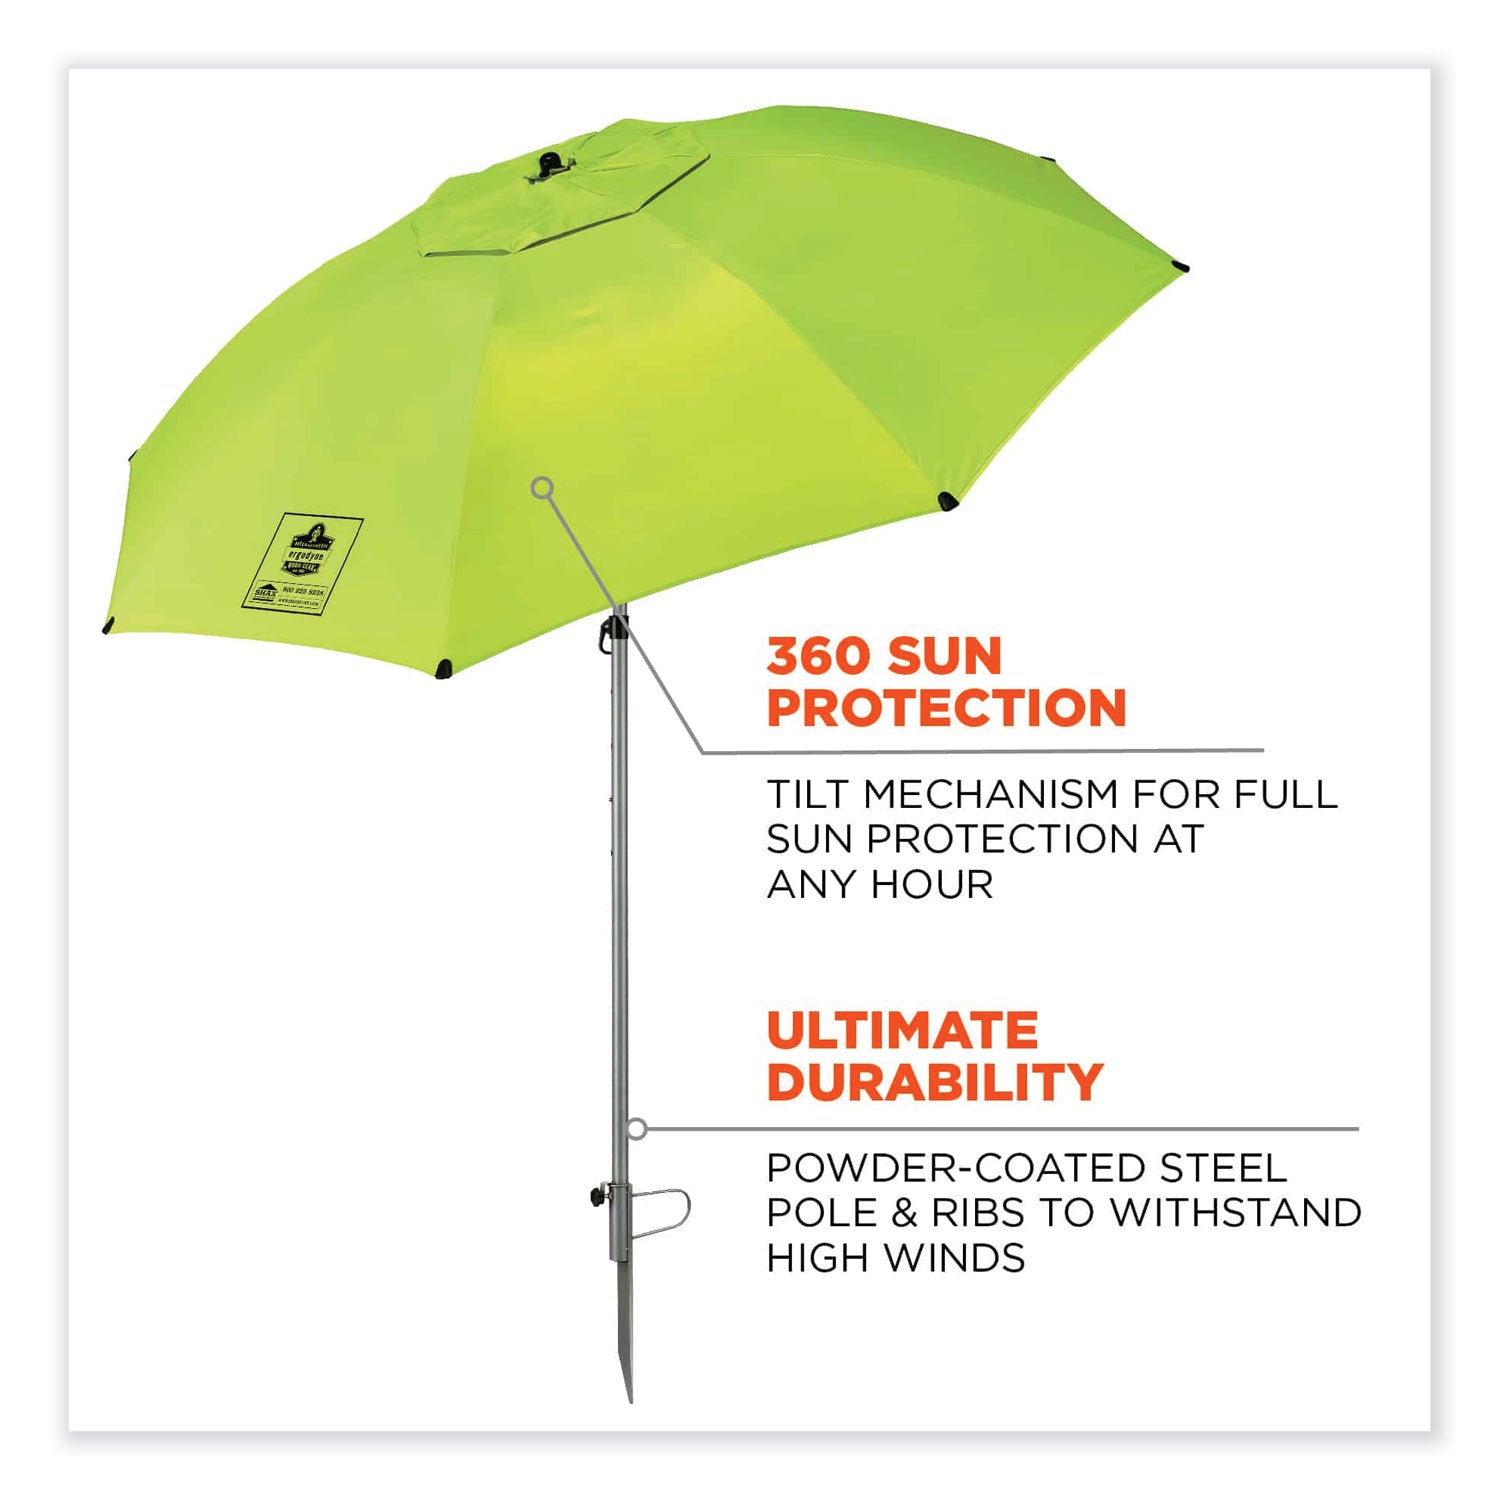 shax-6100-lightweight-work-umbrella-90-span-924-long-lime-canopy-ships-in-1-3-business-days_ego12967 - 4